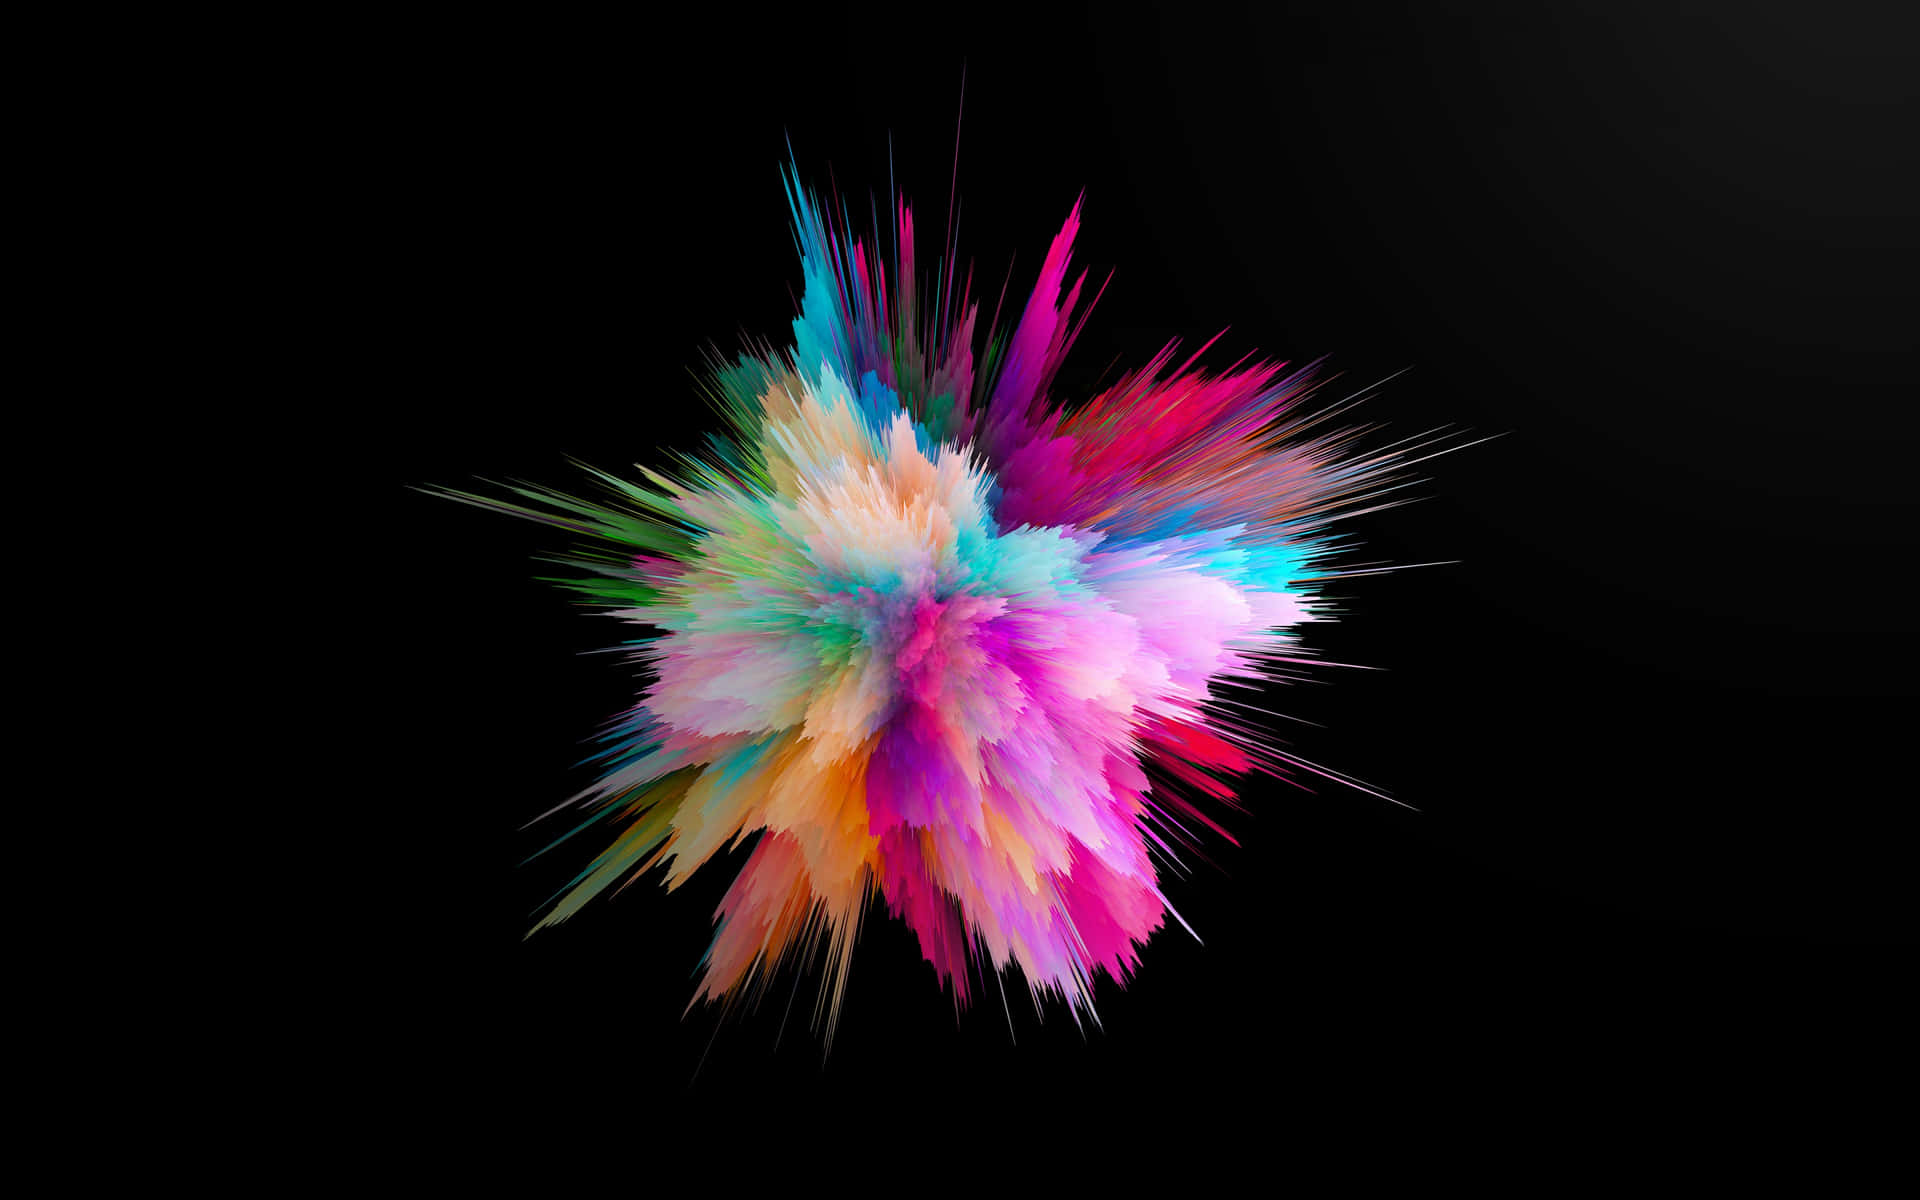 Colorful Powder Explosion On Black Background Wallpaper